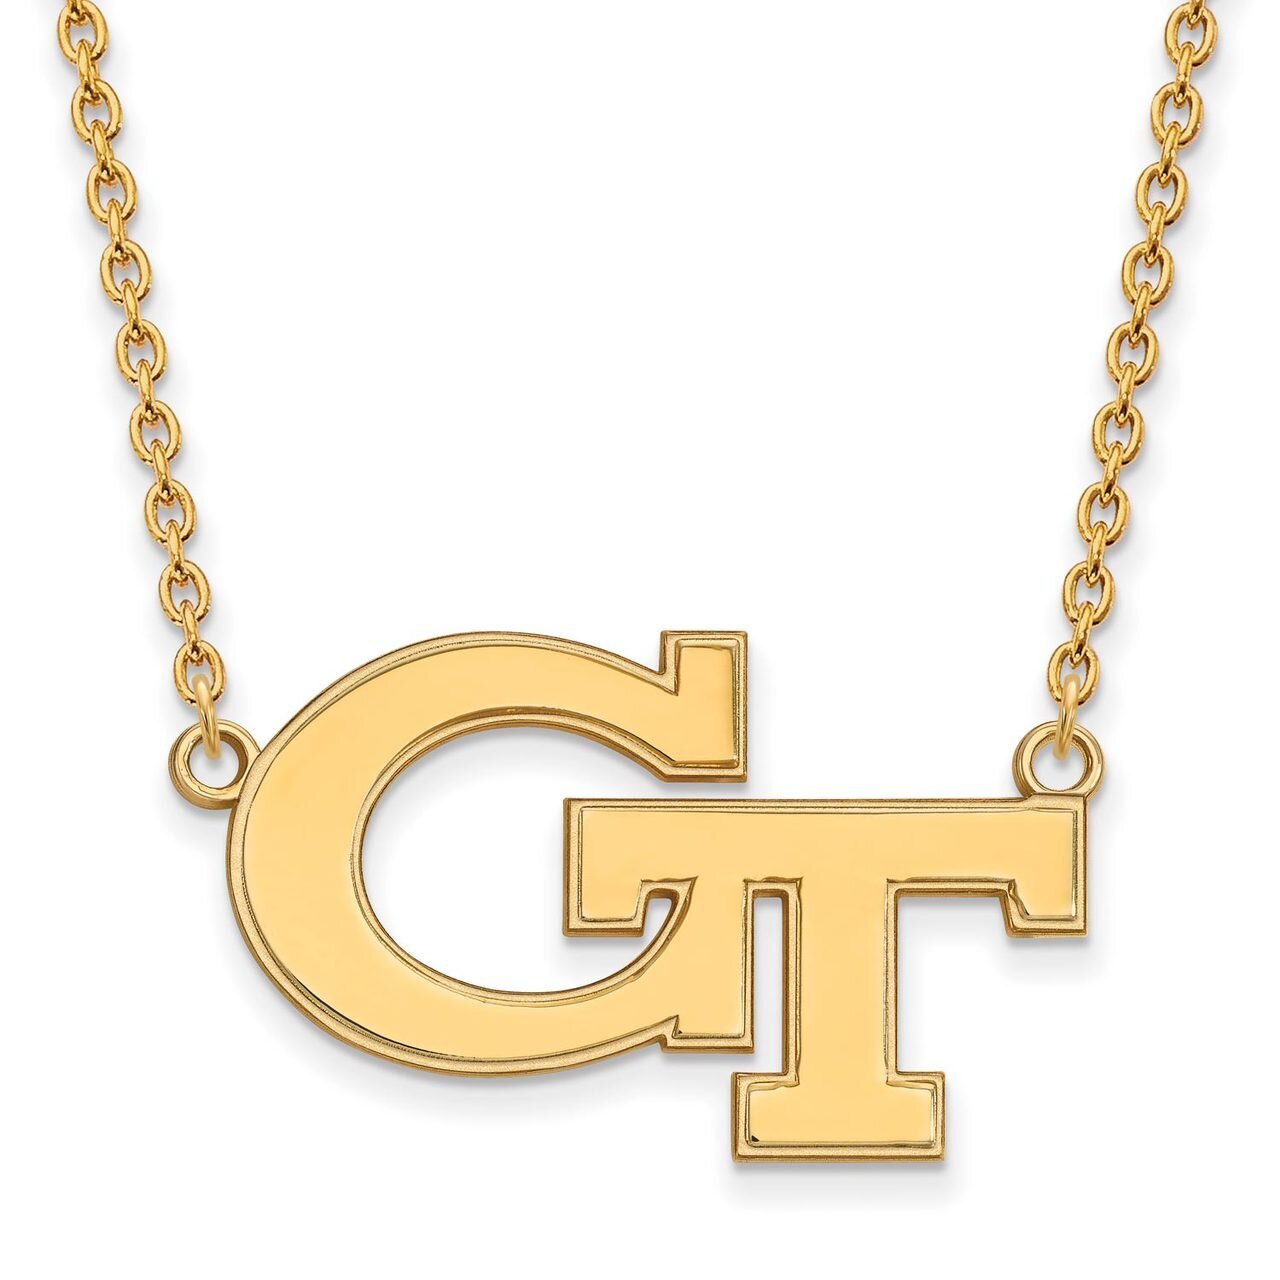 Georgia Institute of Technology Large Pendant with Chain Necklace 14k Yellow Gold 4Y010GT-18